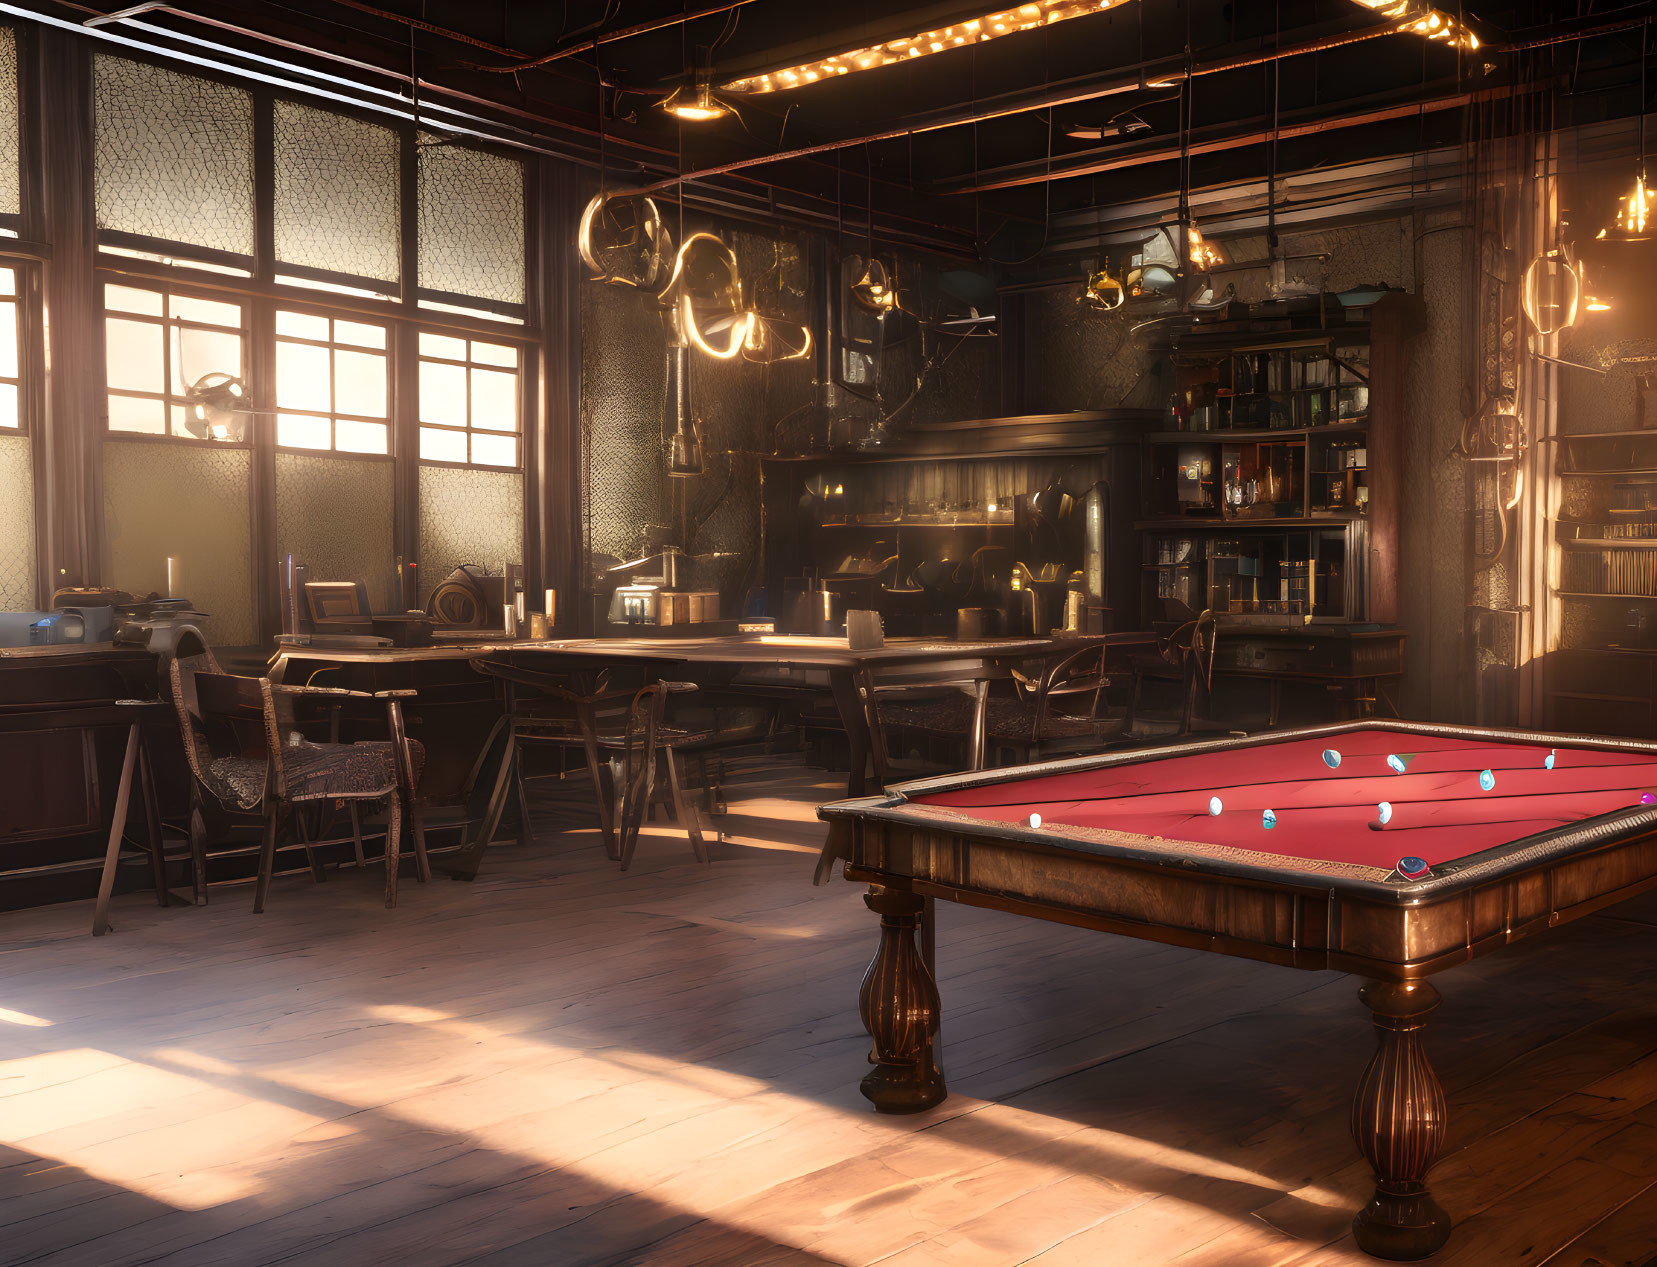 Sophisticated interior with pool table, elegant furniture, vintage decor, and natural light.